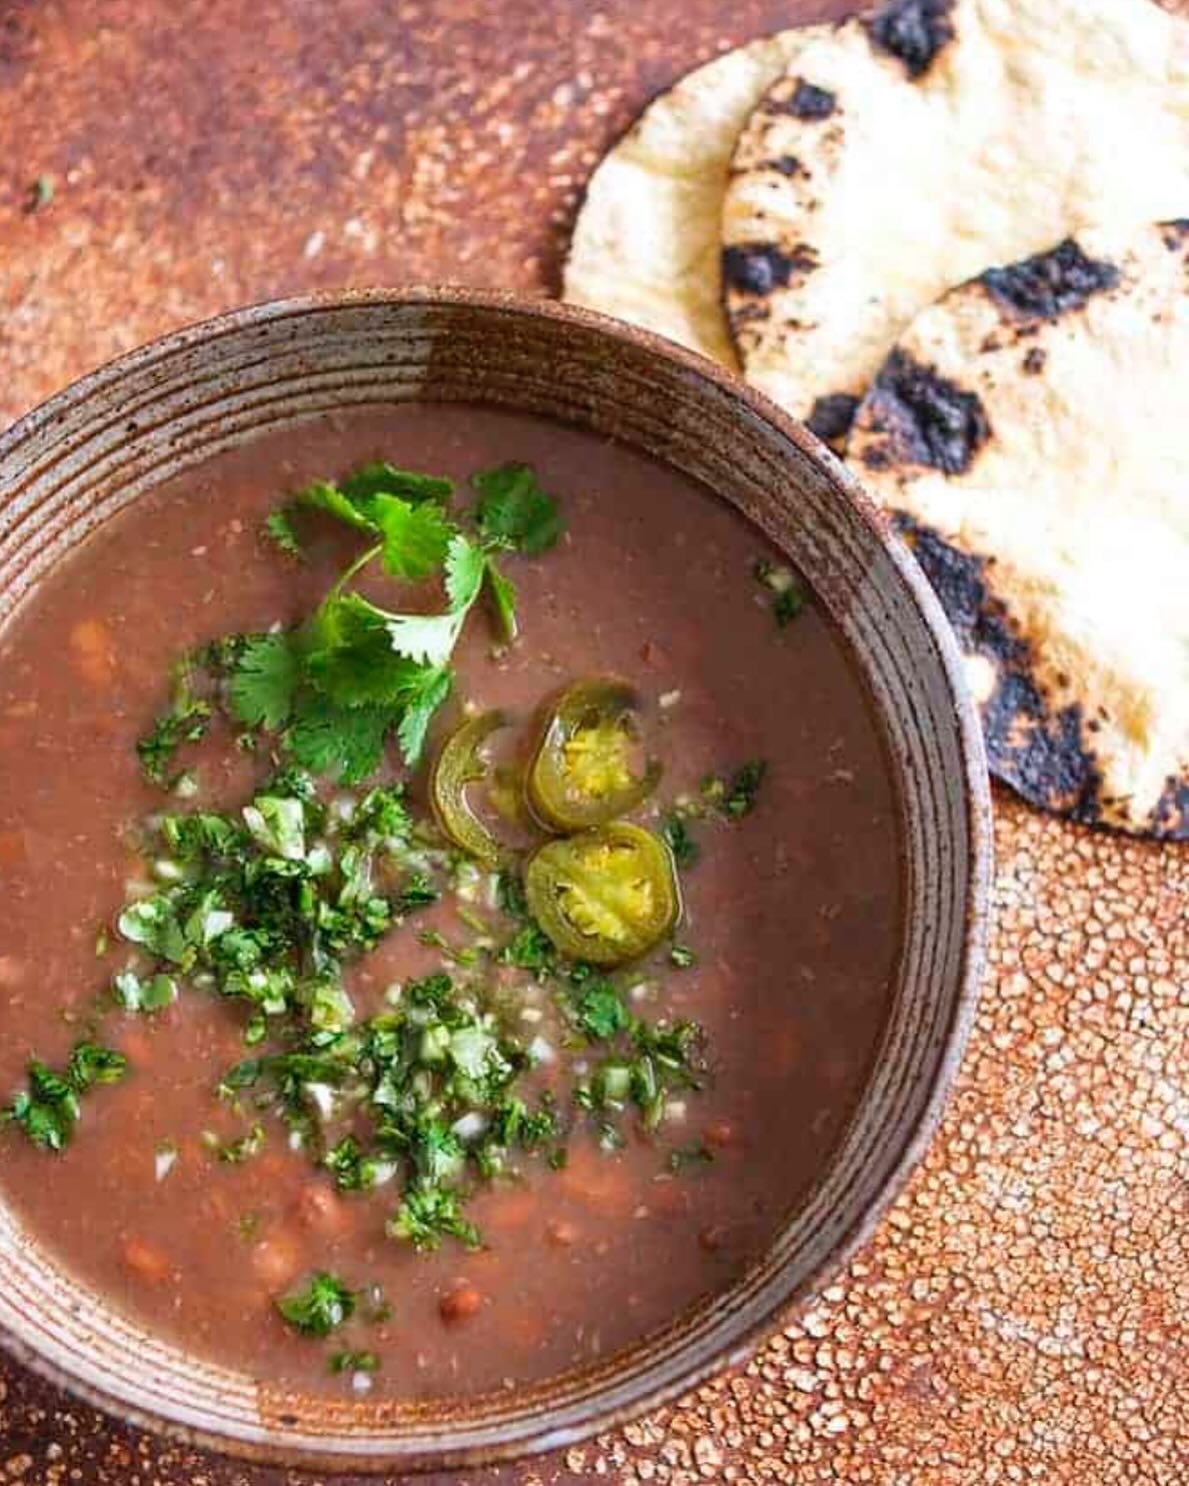 BEAUTIFUL FOOD BY DESIGN | Simply rich&ndash;Frijoles de la Olla. A pot of pinto beans simmered to perfect, creamy richness, then yielding to many a satisfying bowl, also serving as the building blocks of numerous other dining delights&ndash;a little